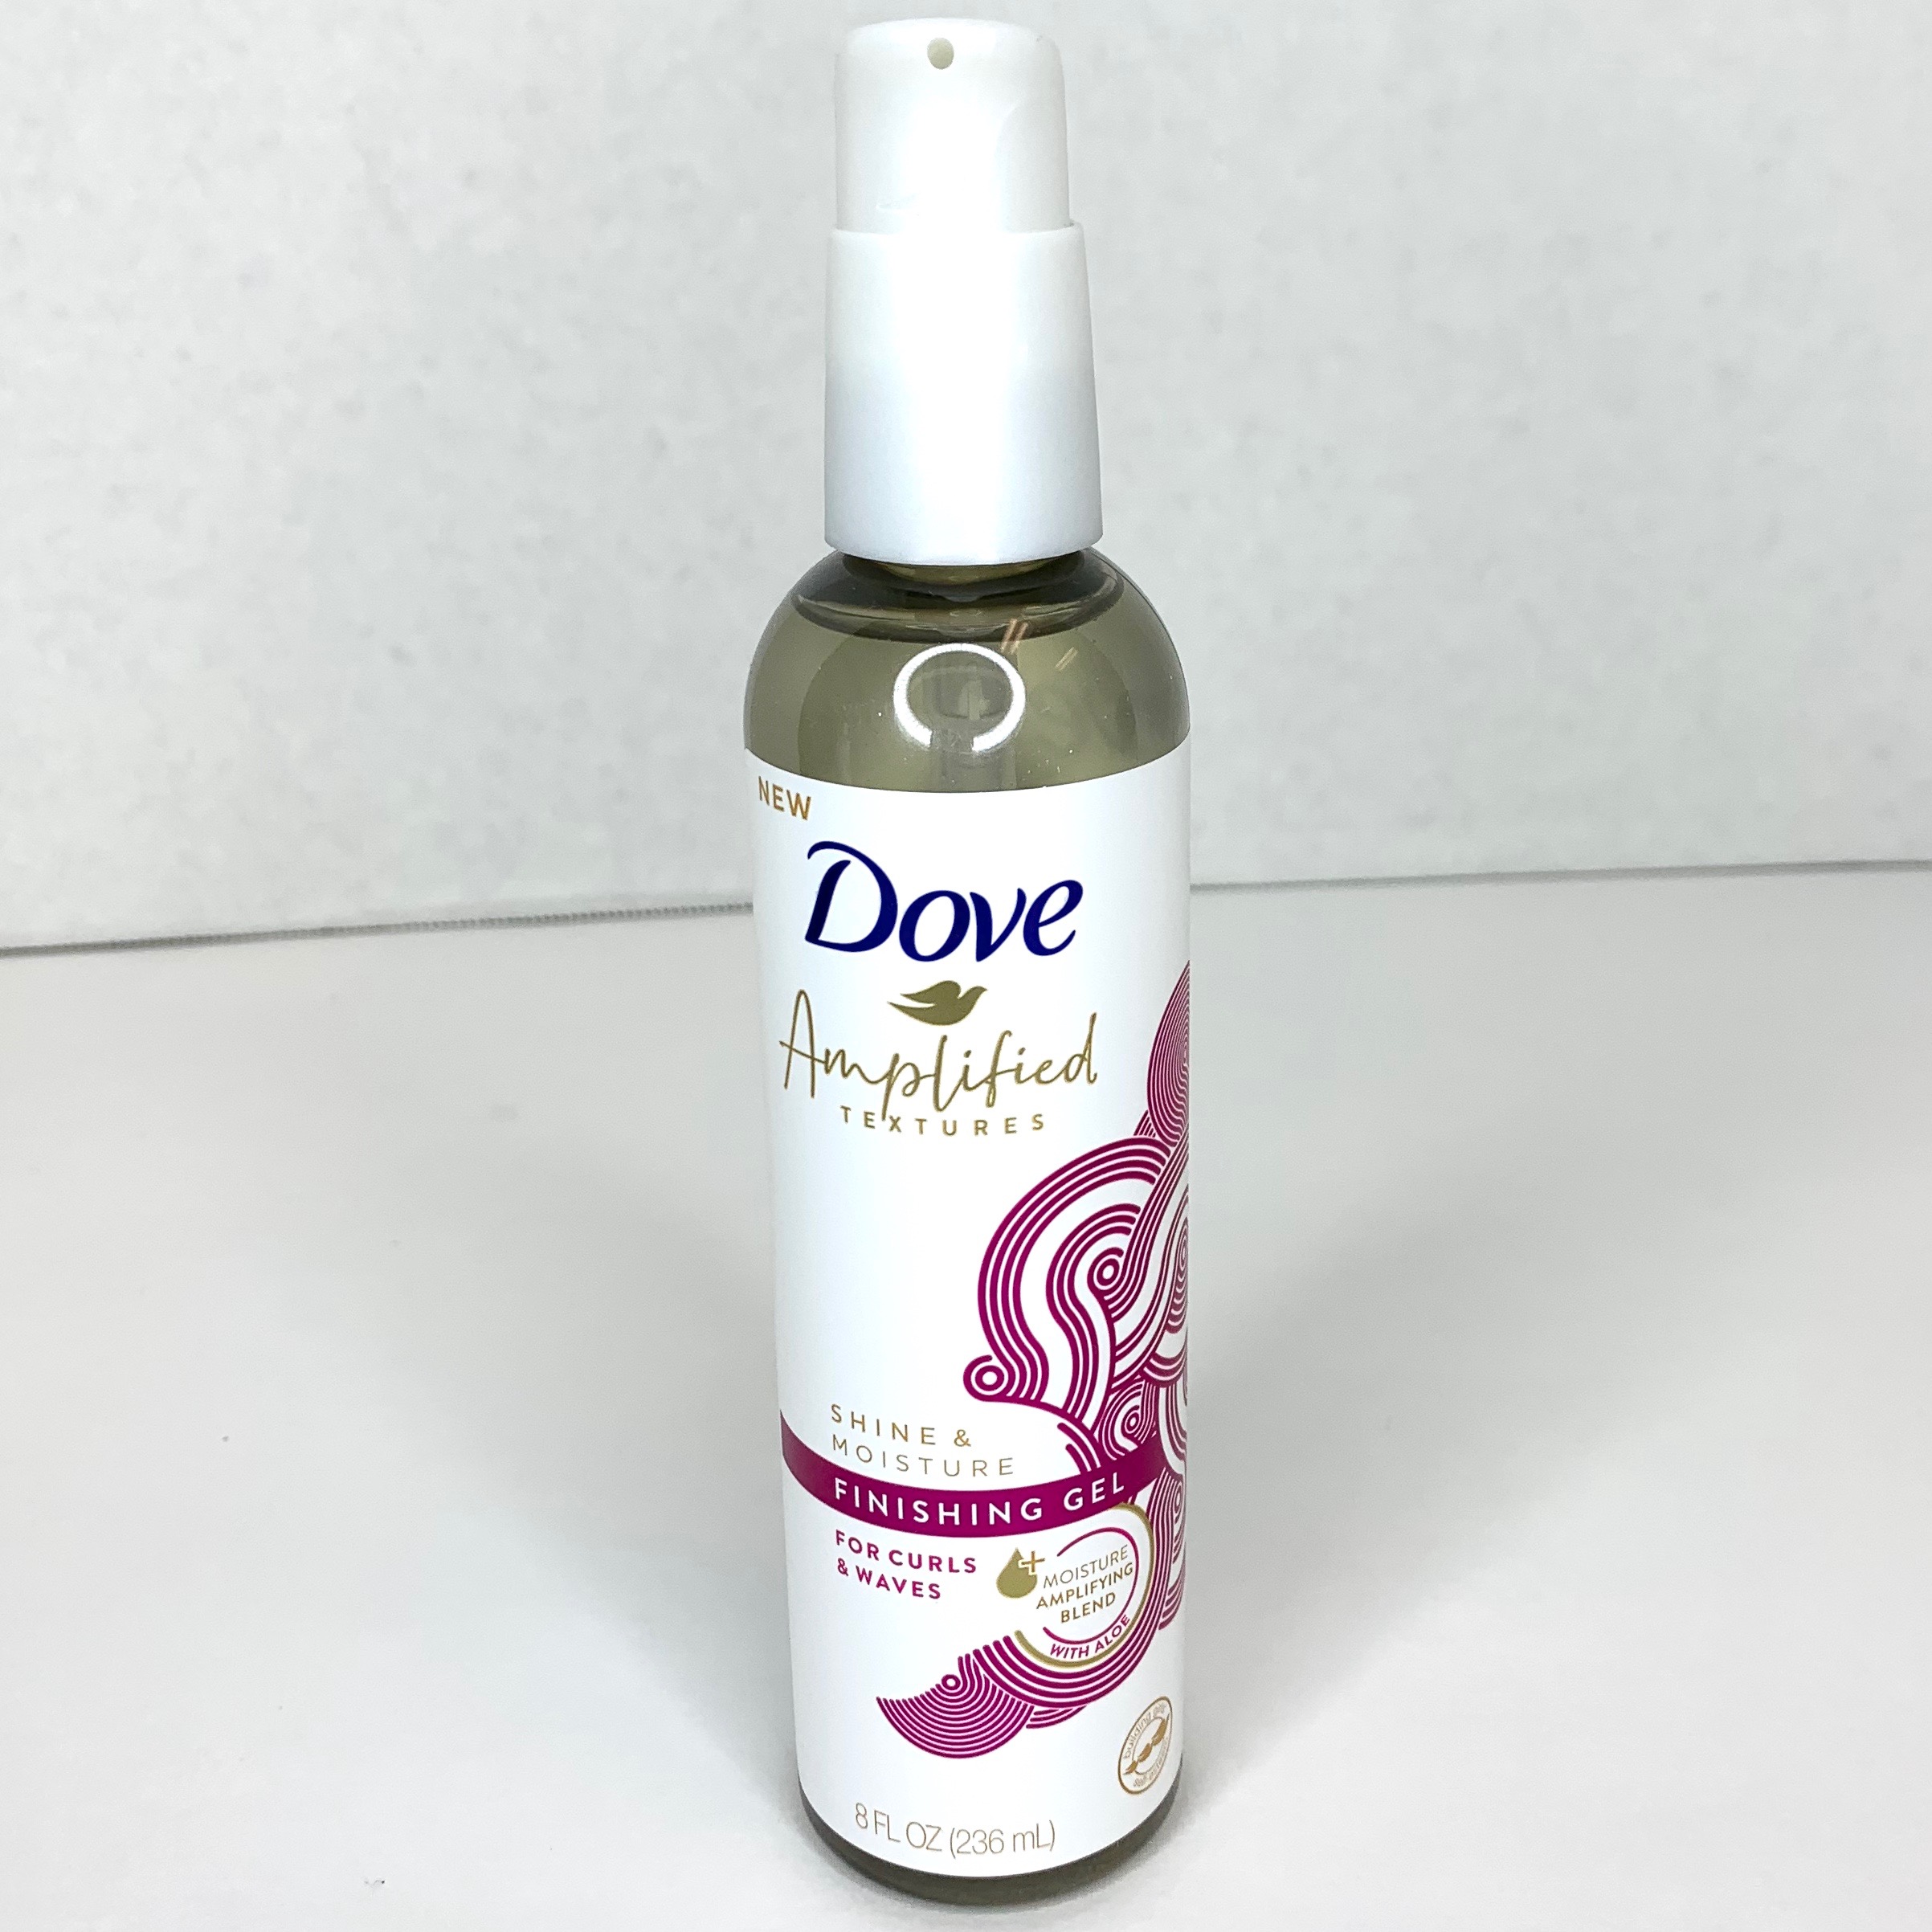 Dove Amplified Textures Shine Moisture Finishing Gel Front for Cocotique April 2020